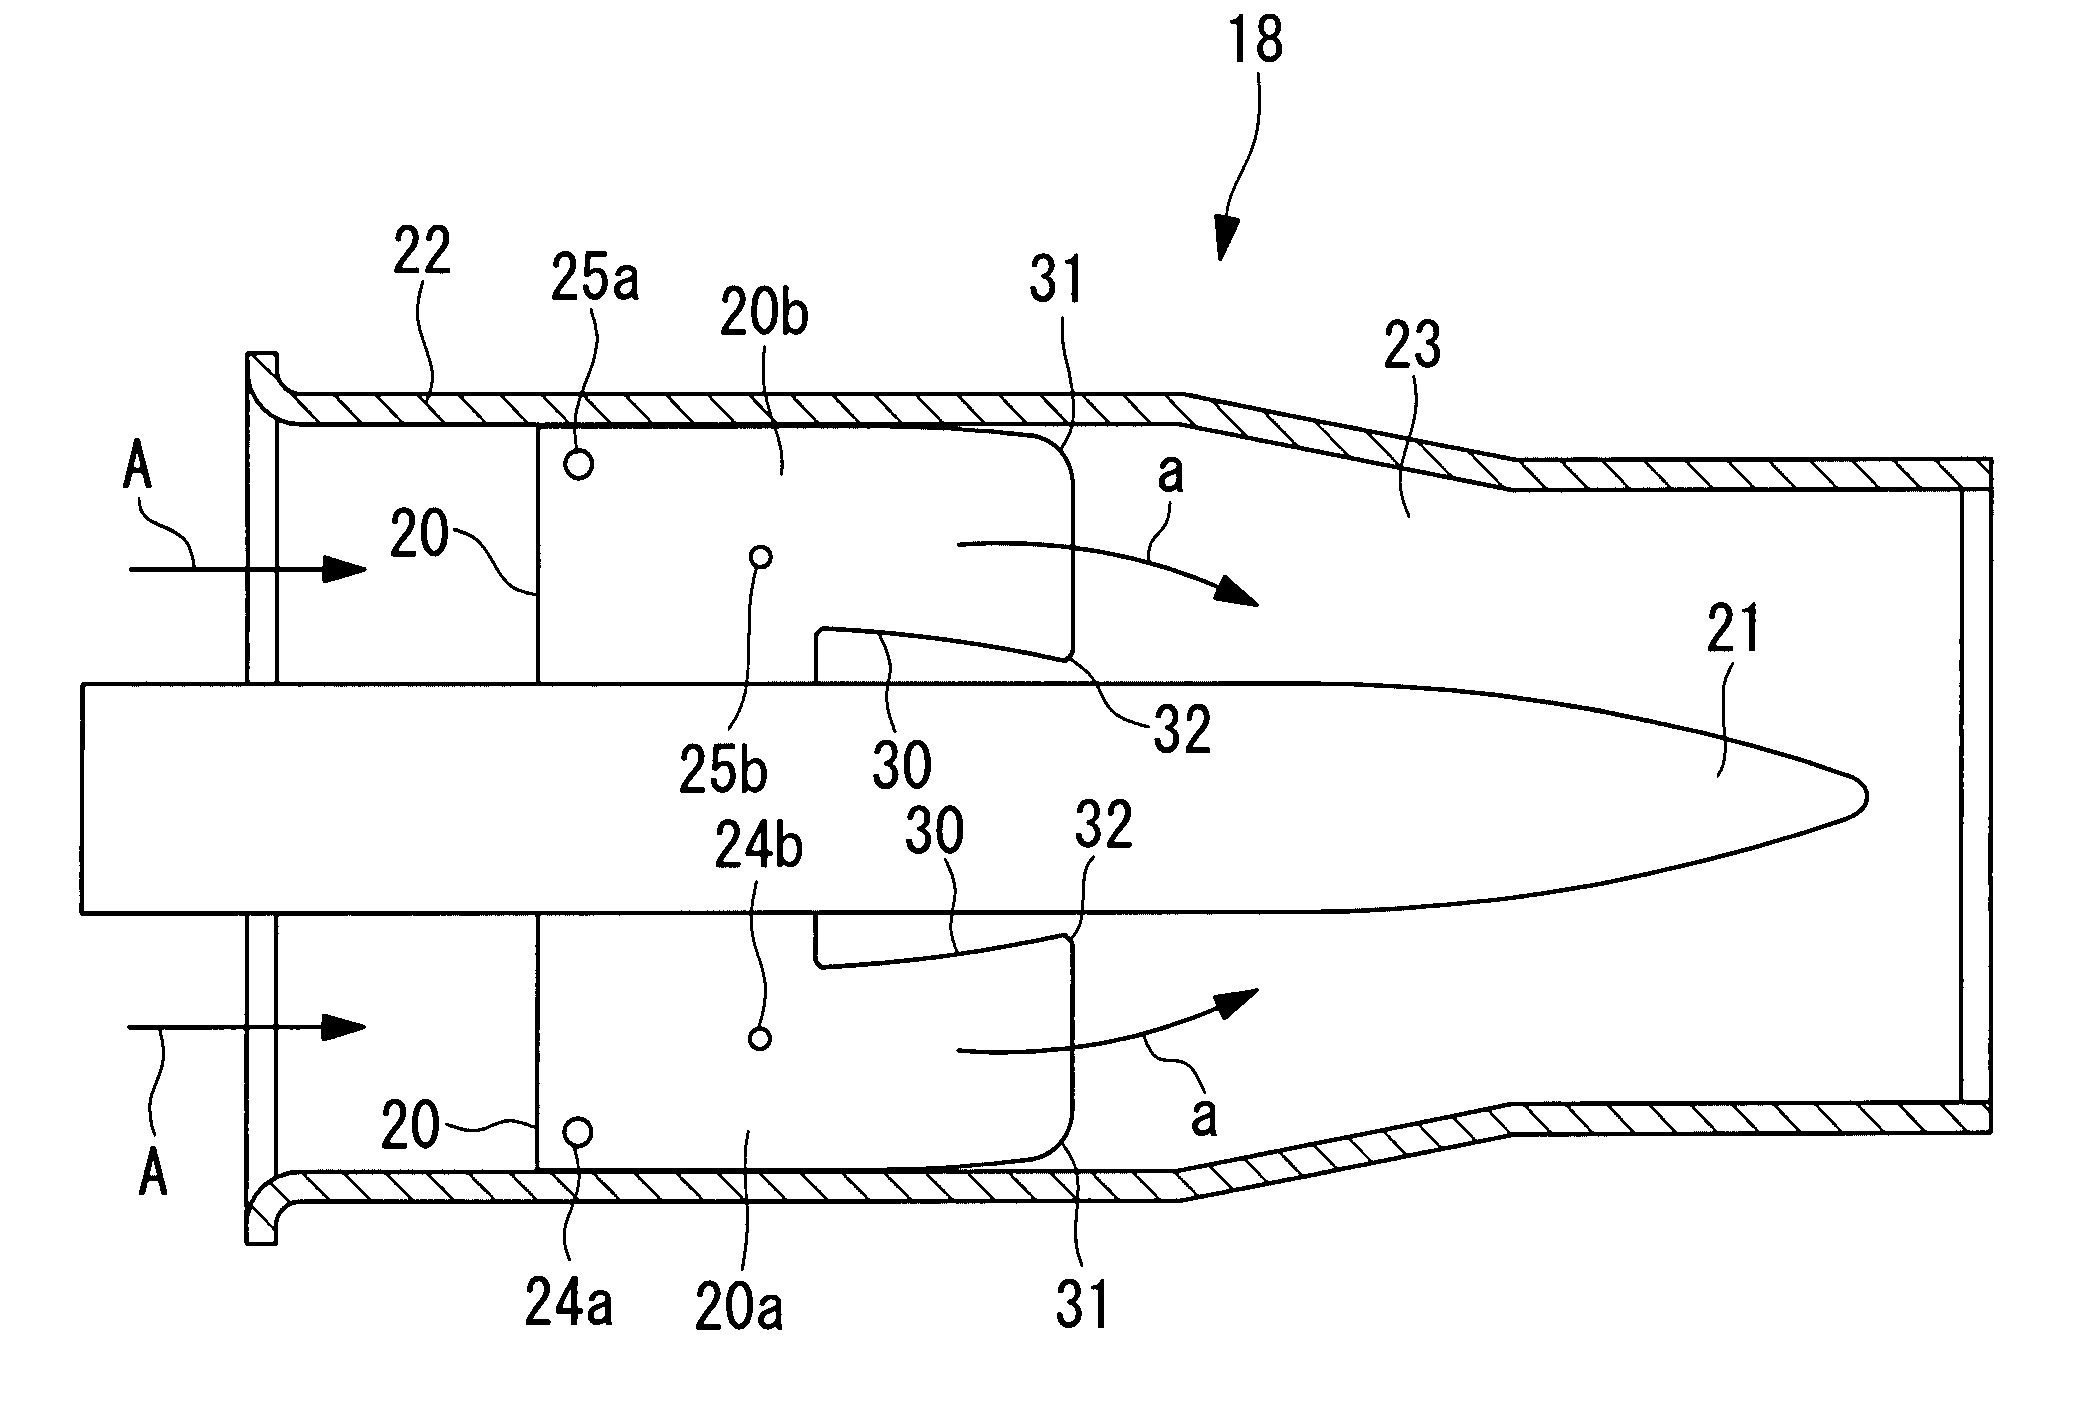 Premixed combustion burner for gas turbine